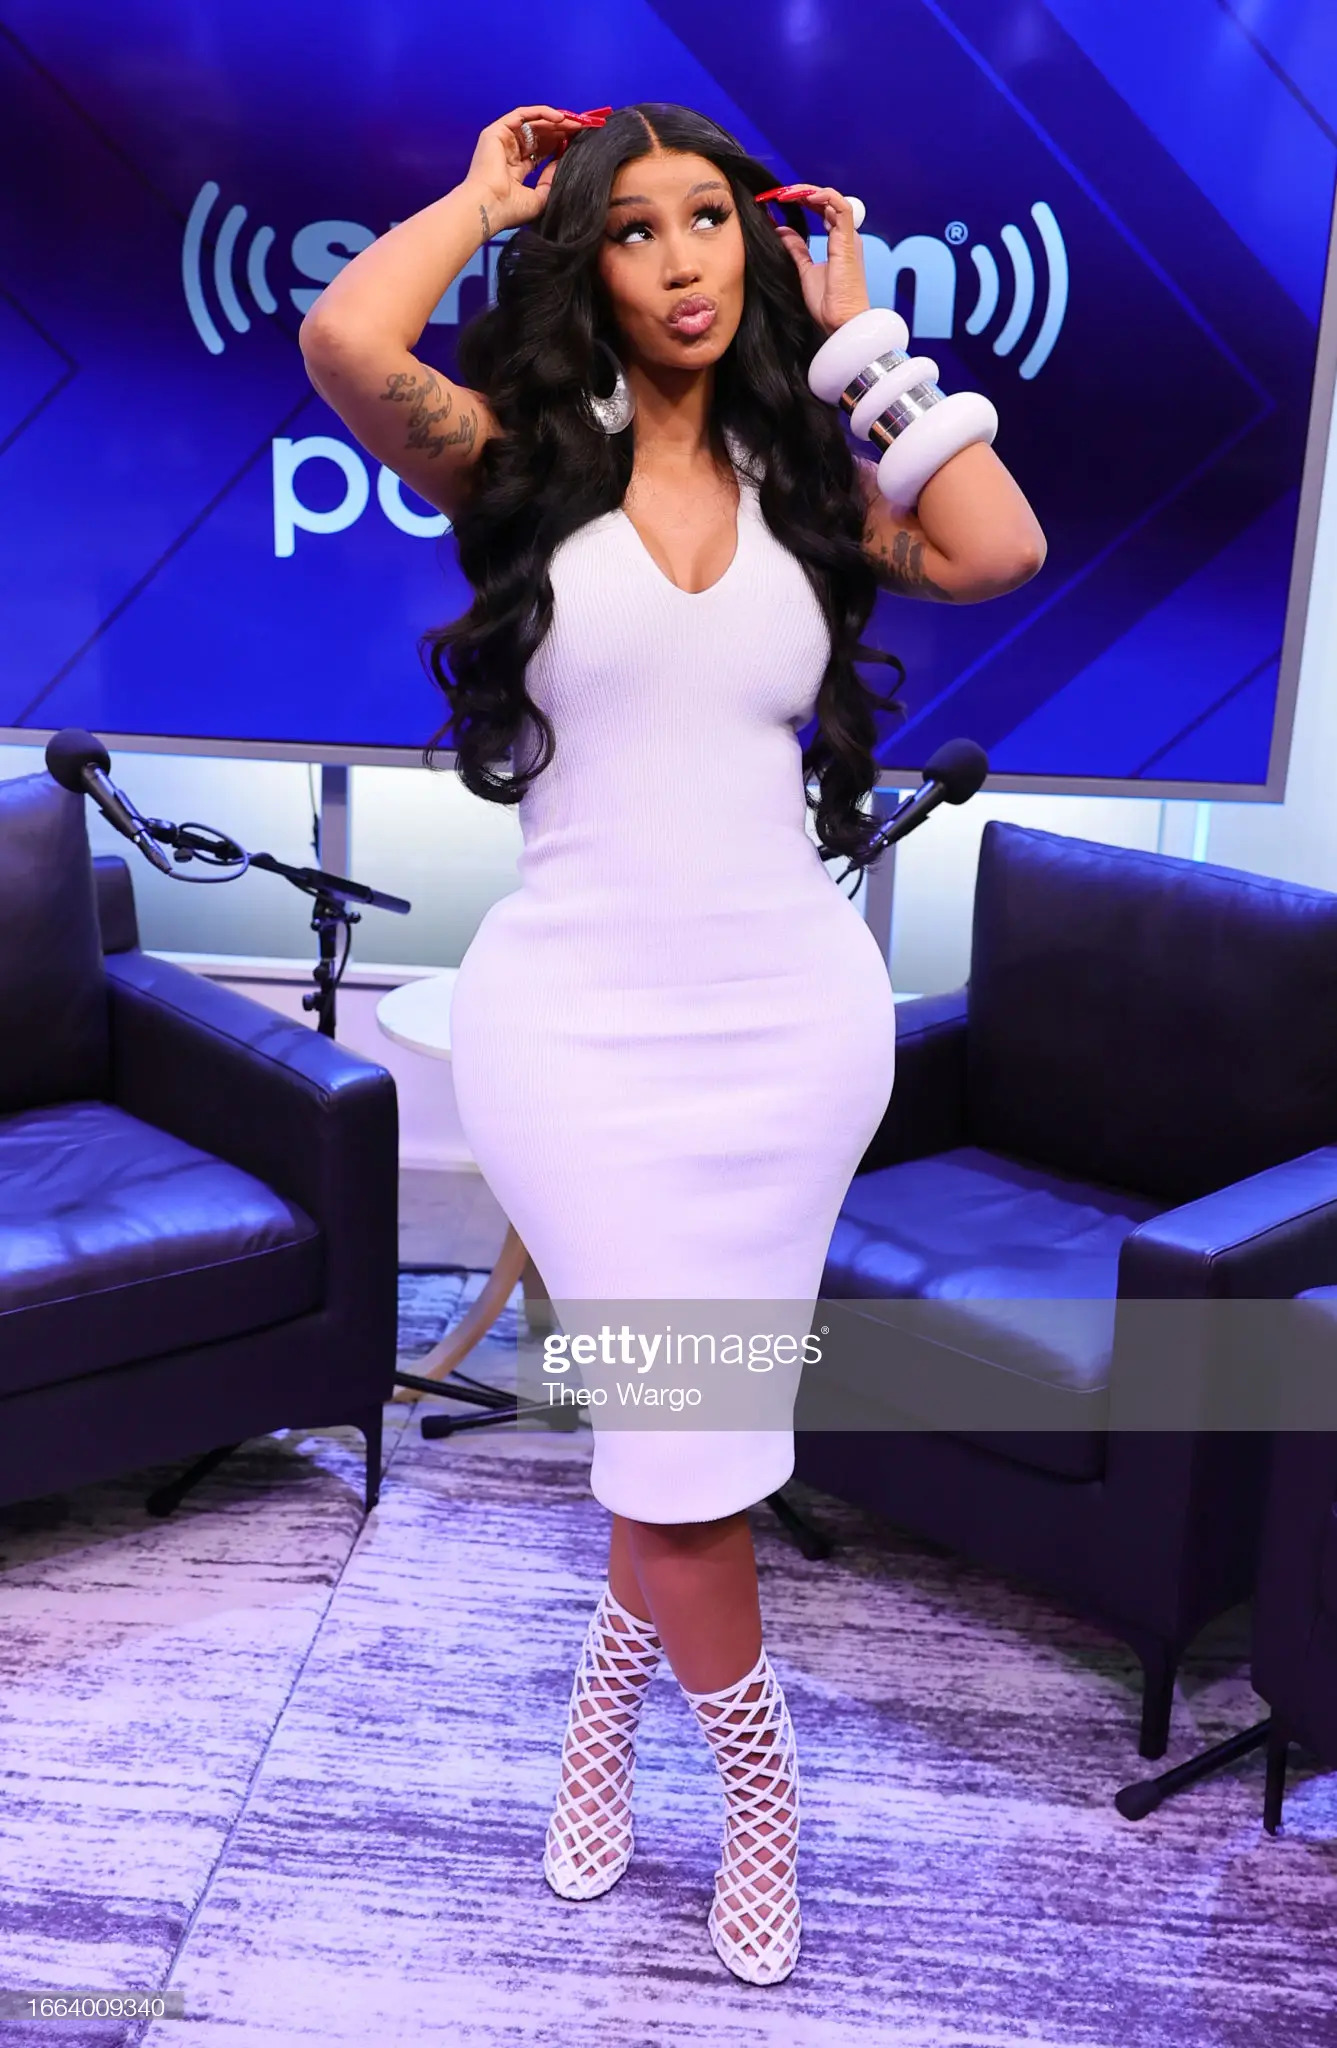 Cardi B Speaks On Her Relationship With Offset + More On SiriusXM Hits 1